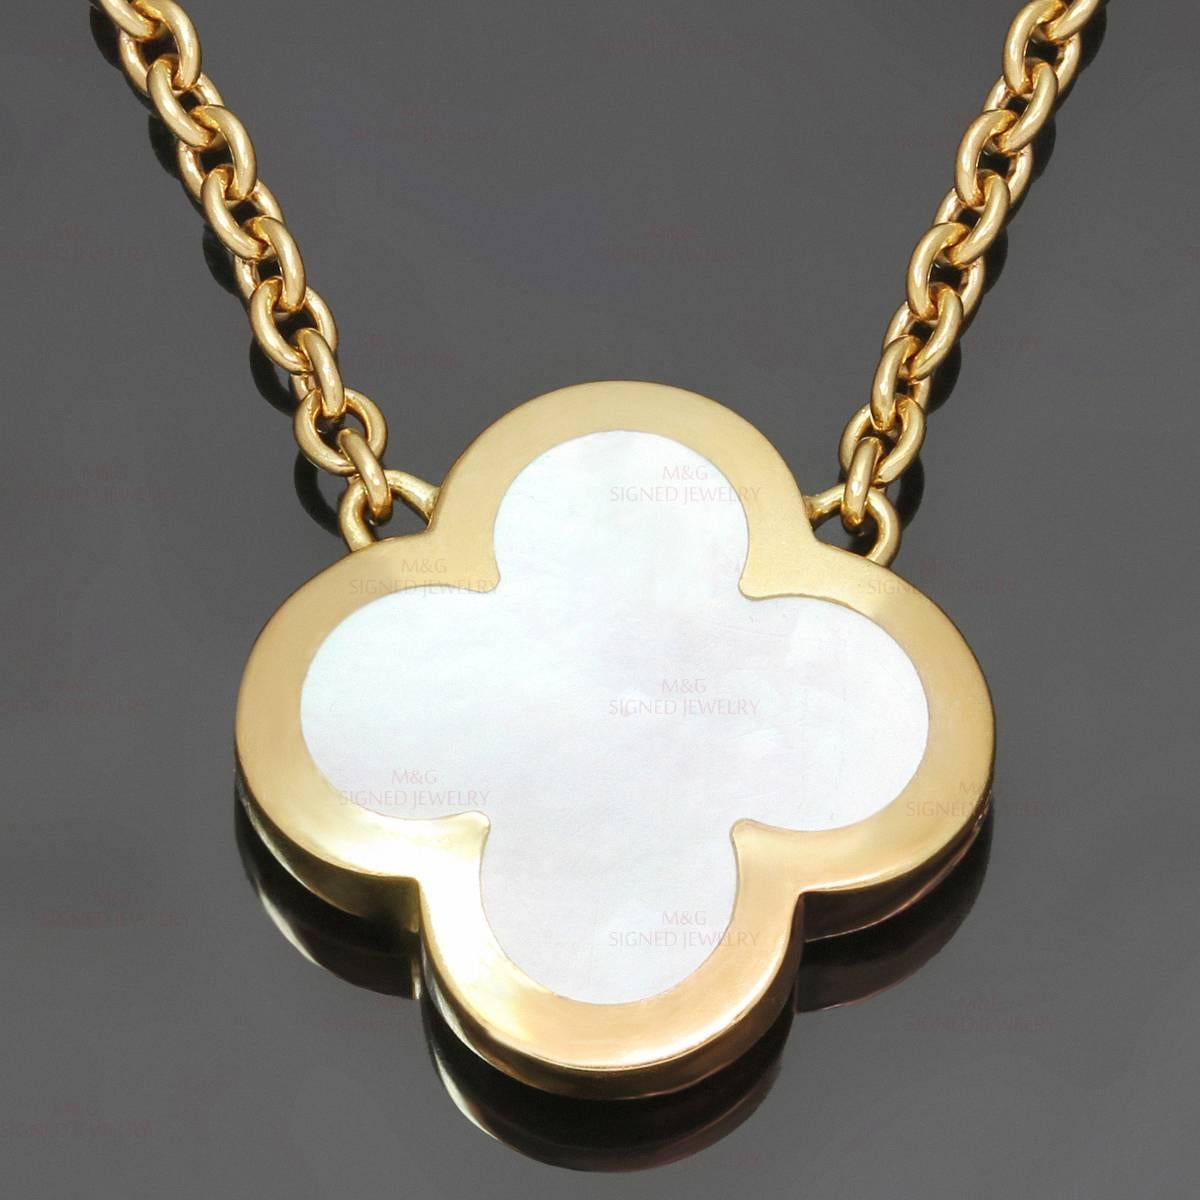 This elegant Van Cleef & Arpels pendant necklace from the pure Alhambra collection features the lucky clover design crafted in 18k yellow gold and set with white mother-of-pearl. Made in France circa 2000s. Measurements: 0.62" (16mm) width,